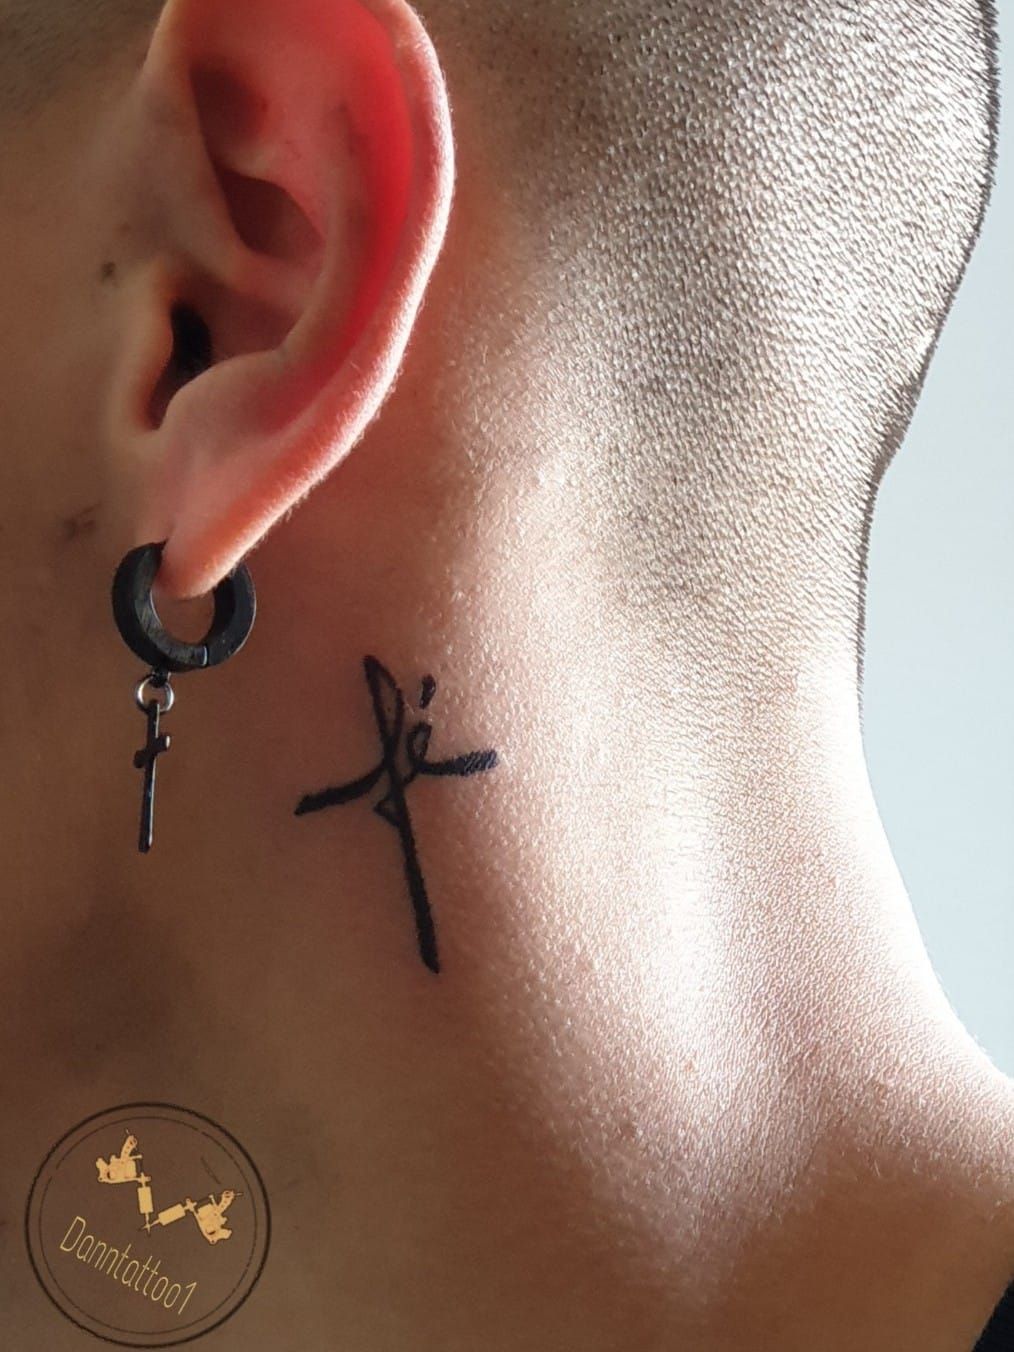 Fe means faith in Spanish Very tiny tattoo which to me it means that all  I need is faith as small as a m  Tatuajes minimalistas Tattoo  minimalistas Tatuajes